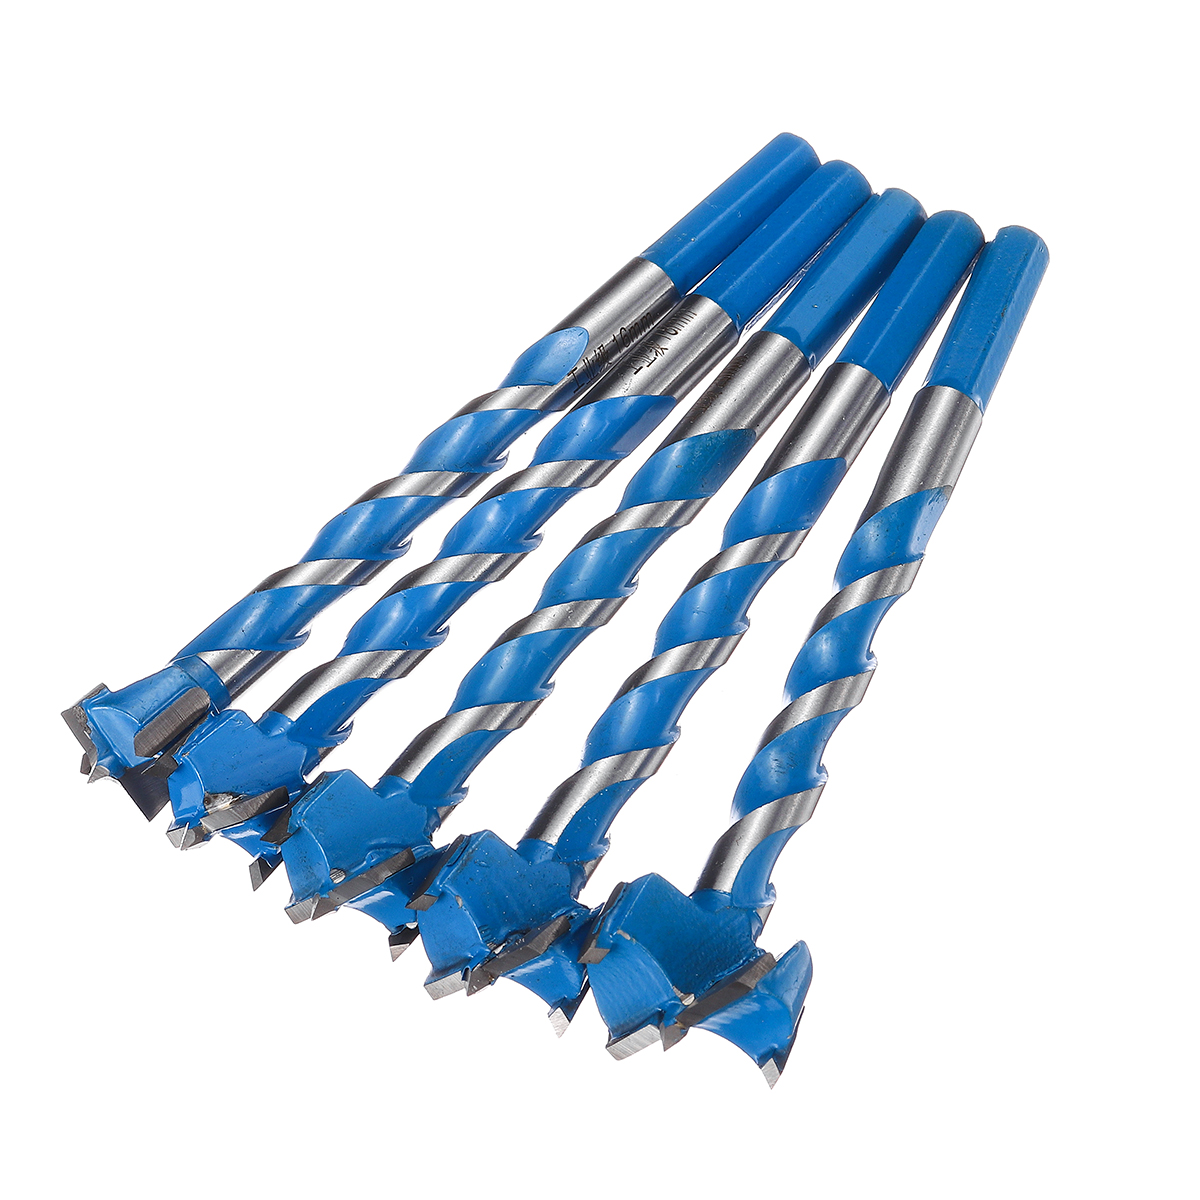 16-25MM-Lengthened-Thread-Alloy-Hole-Saw-Cutter-Forstner-Drill-Bit-Woodworking-Punching-Hex-Shank-1602045-5